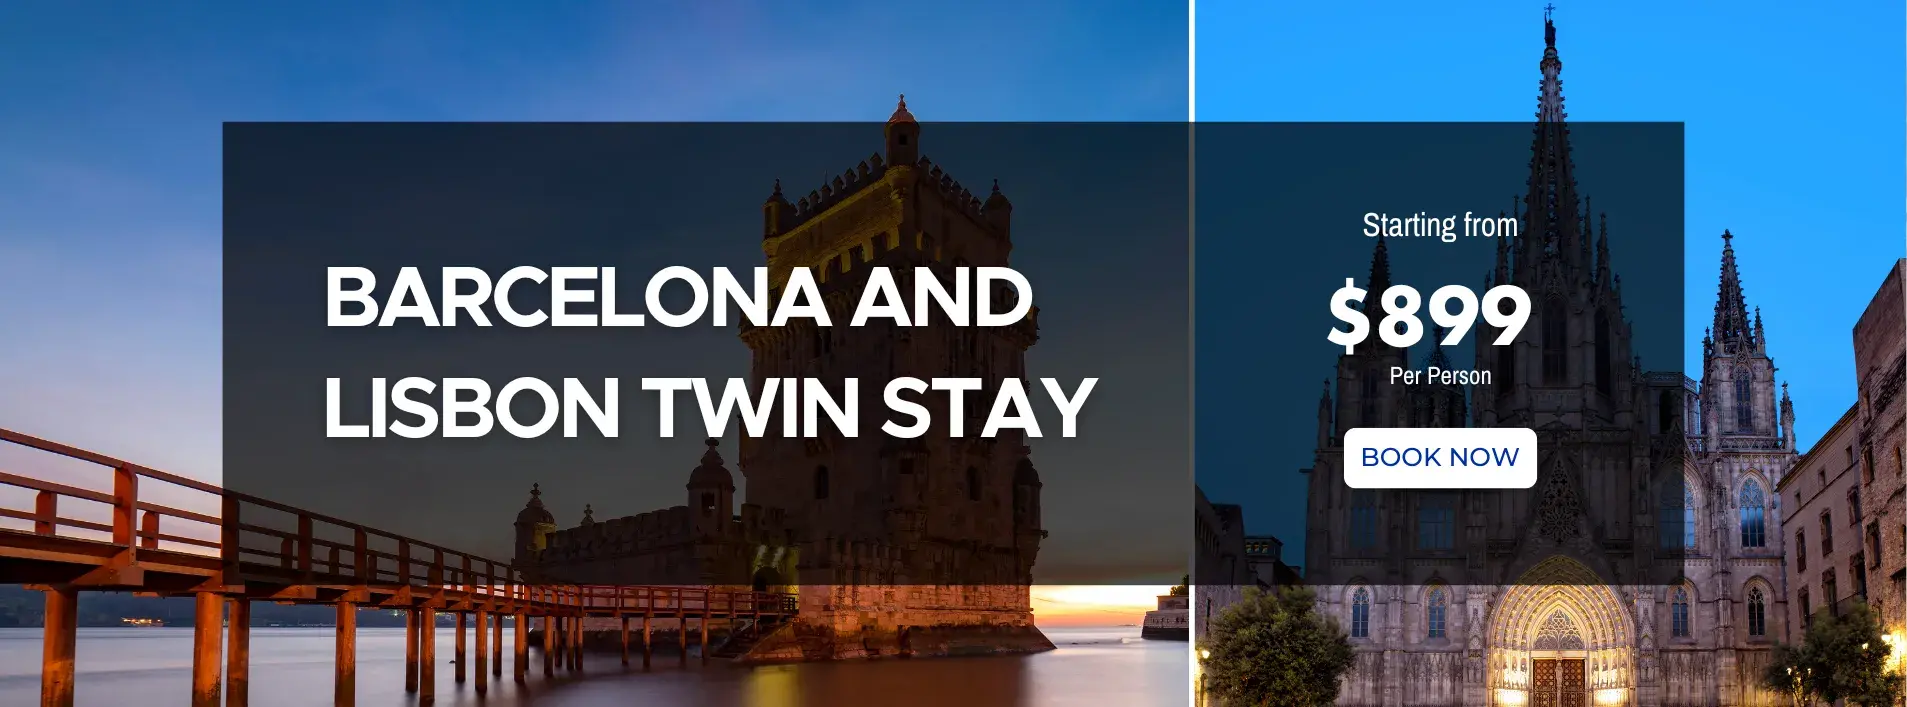 Barcelona and Lisbon Twin Stay W/Air